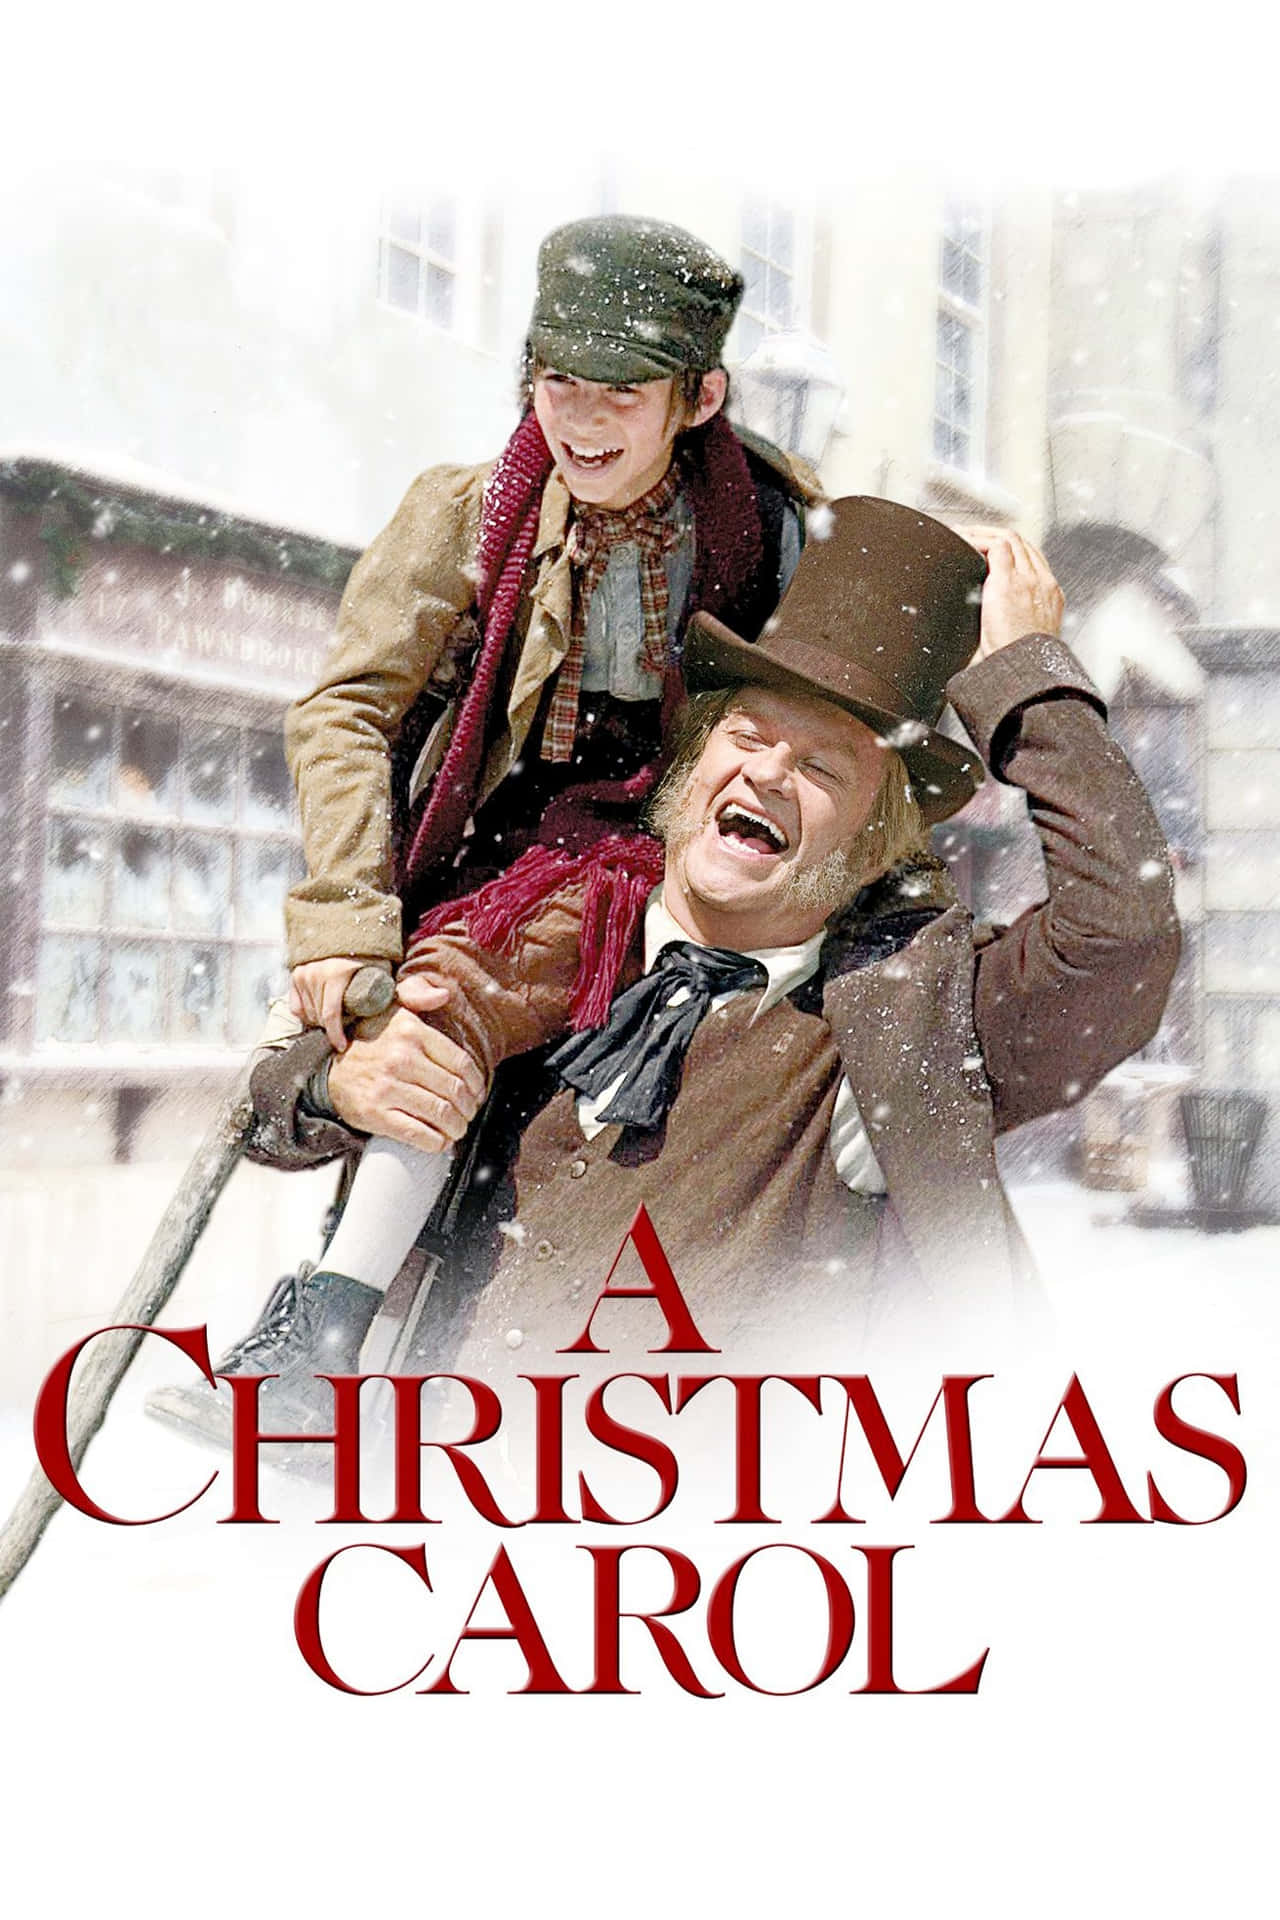 Scrooge has a change of heart in Charles Dicken's A Christmas Carol